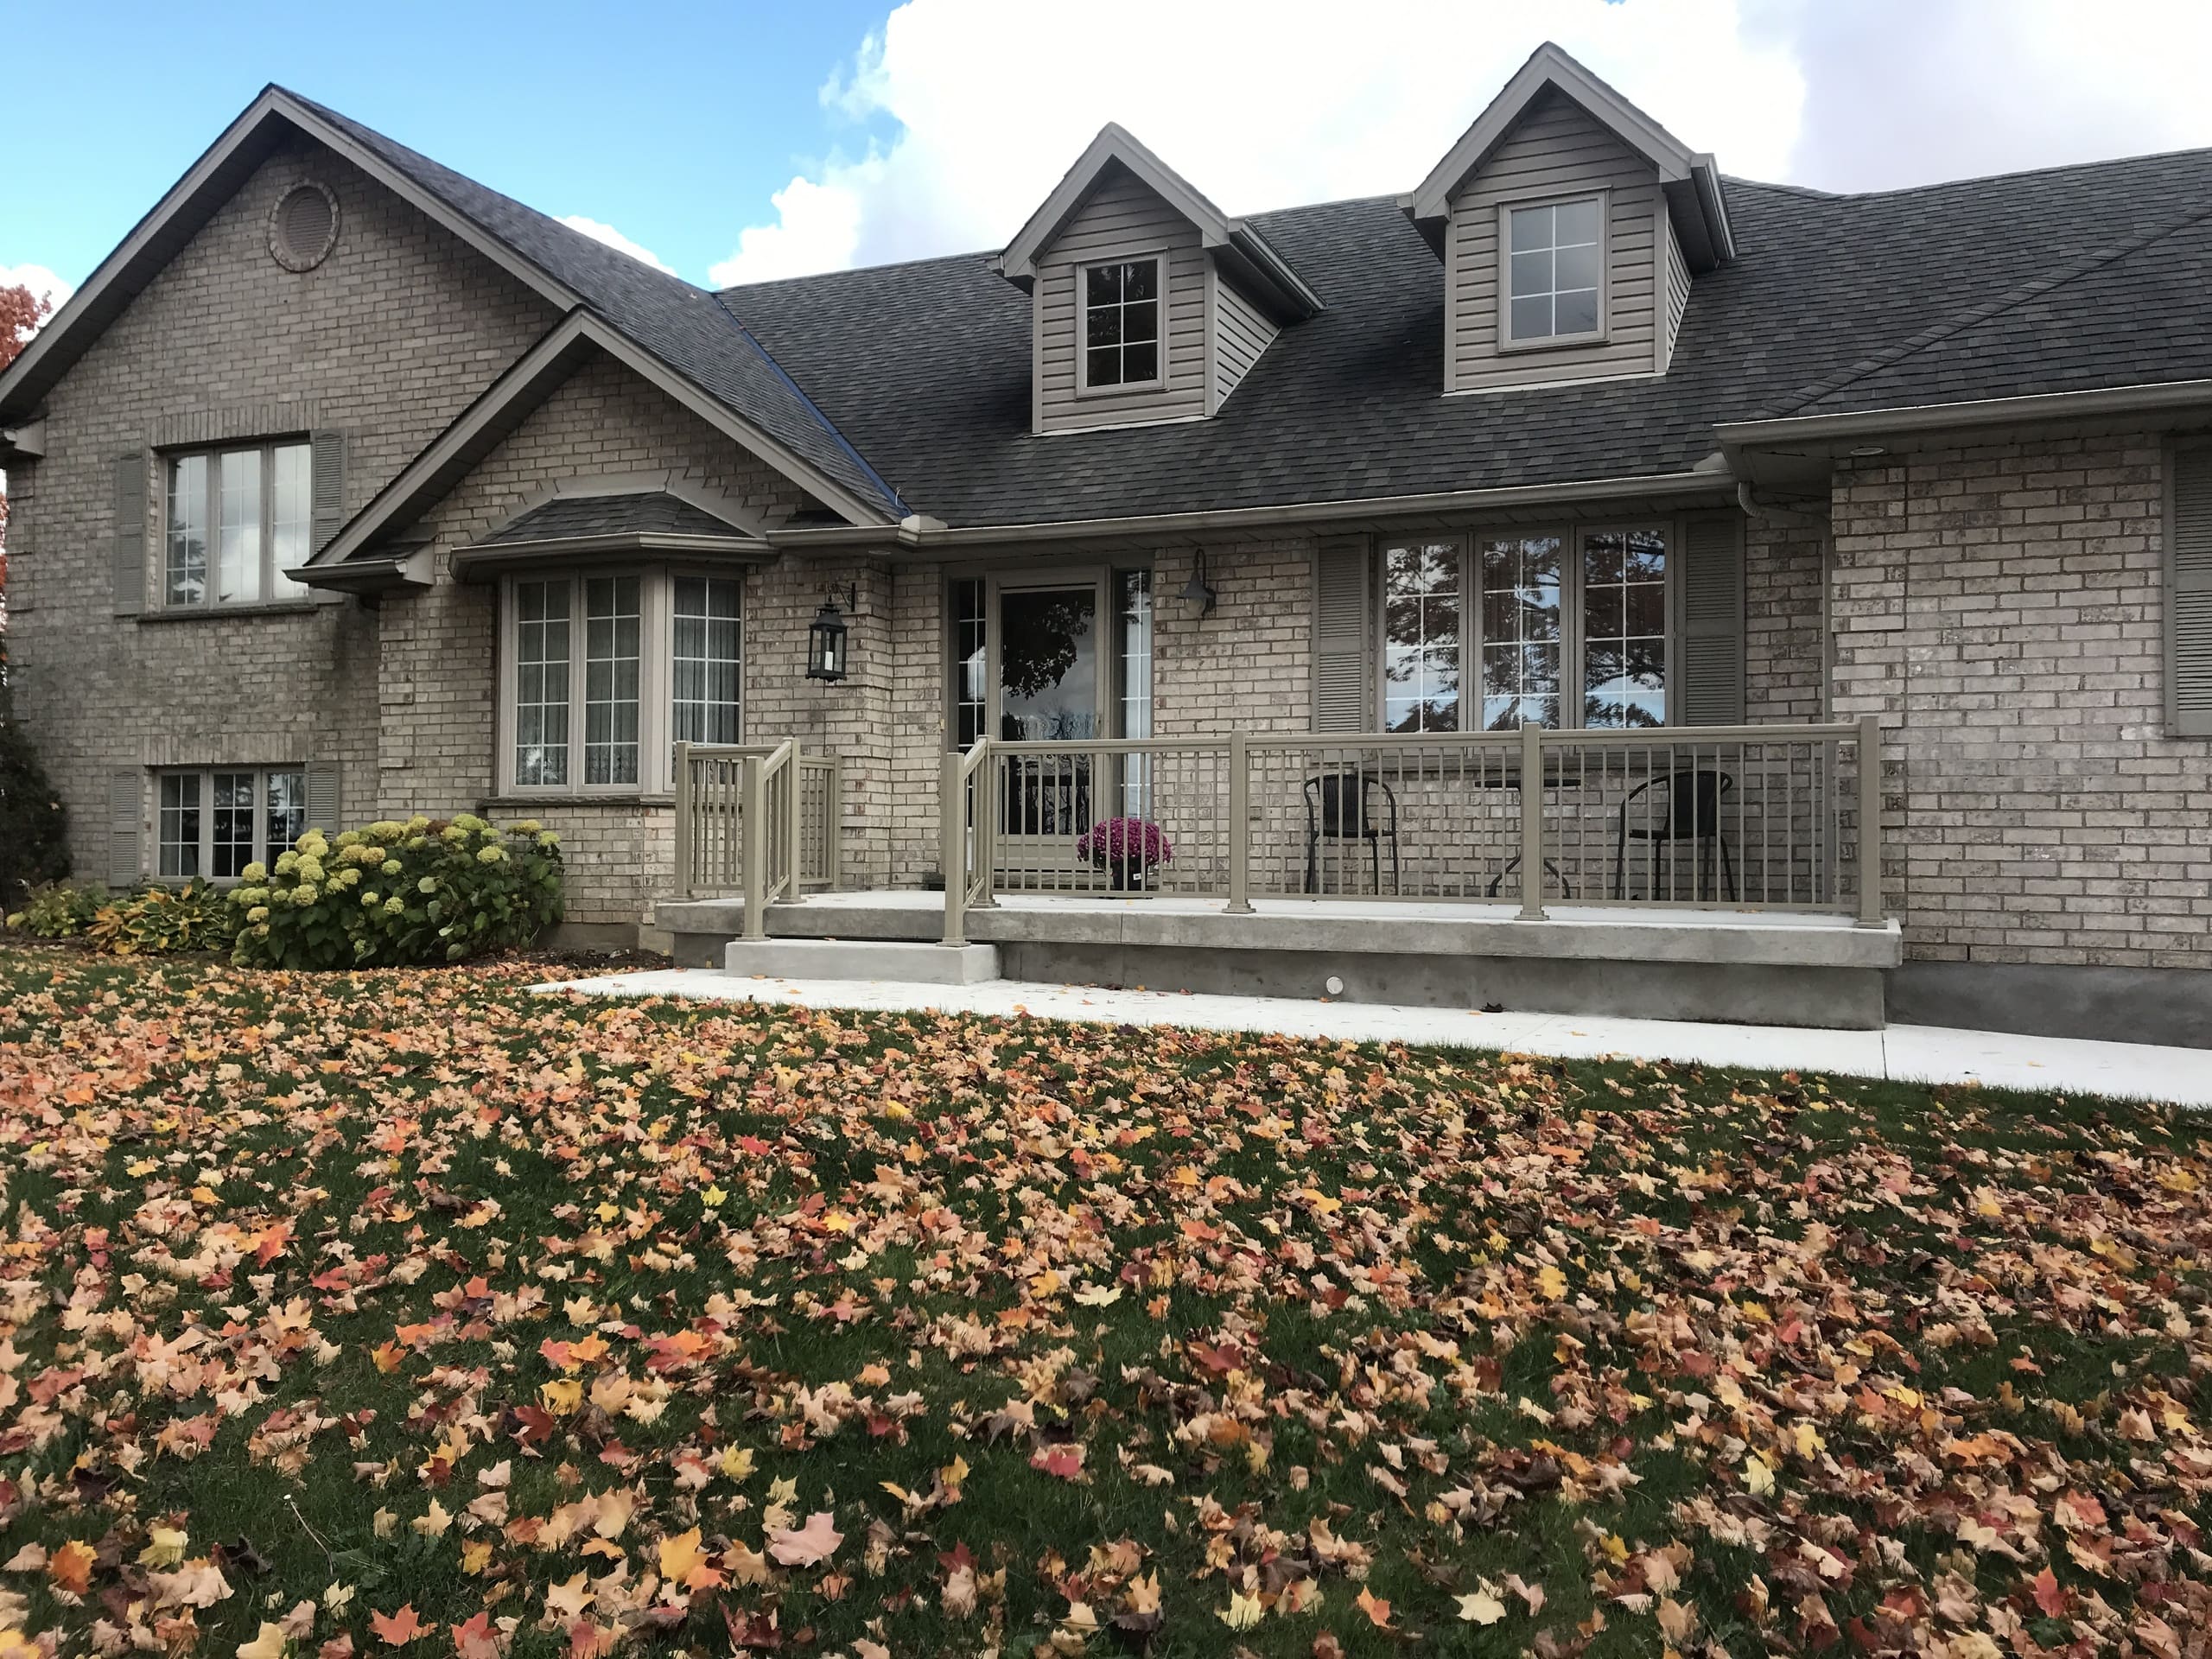 CLAY Aluminum Porch Railings Installation (Georgetown, ON)